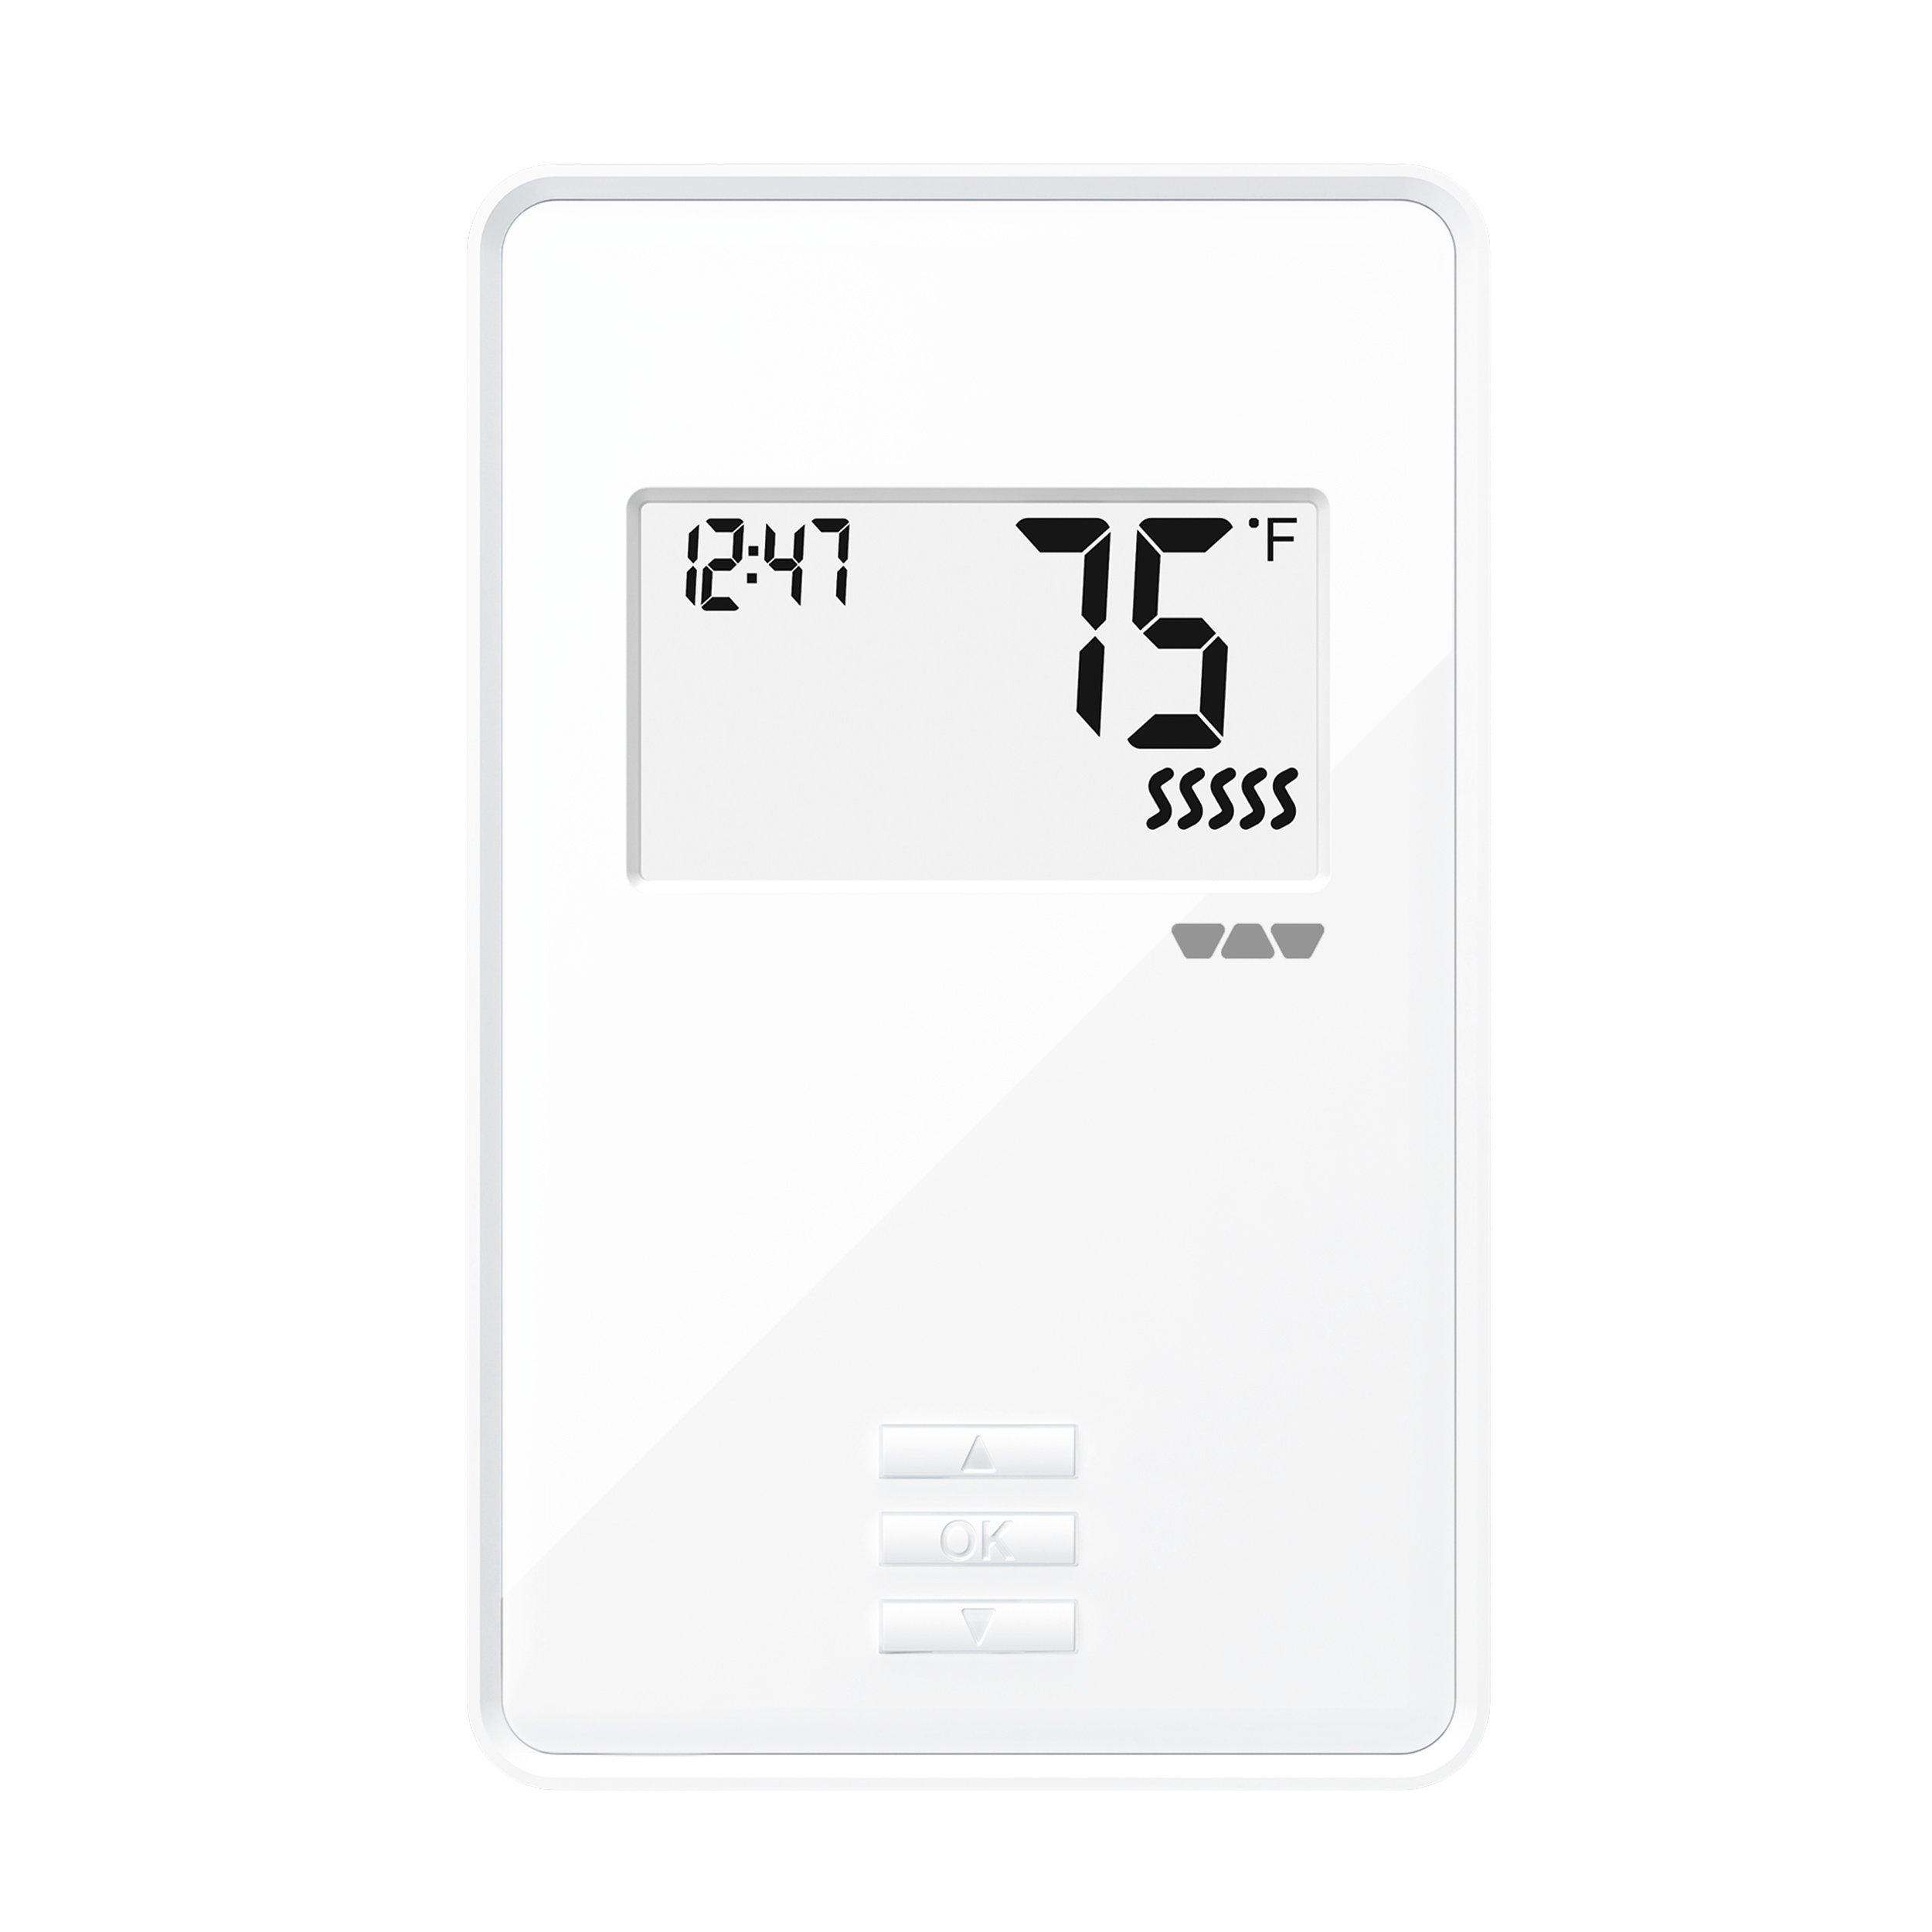 Schluter-Ditra-Heat Nonprogrammable Thermostat